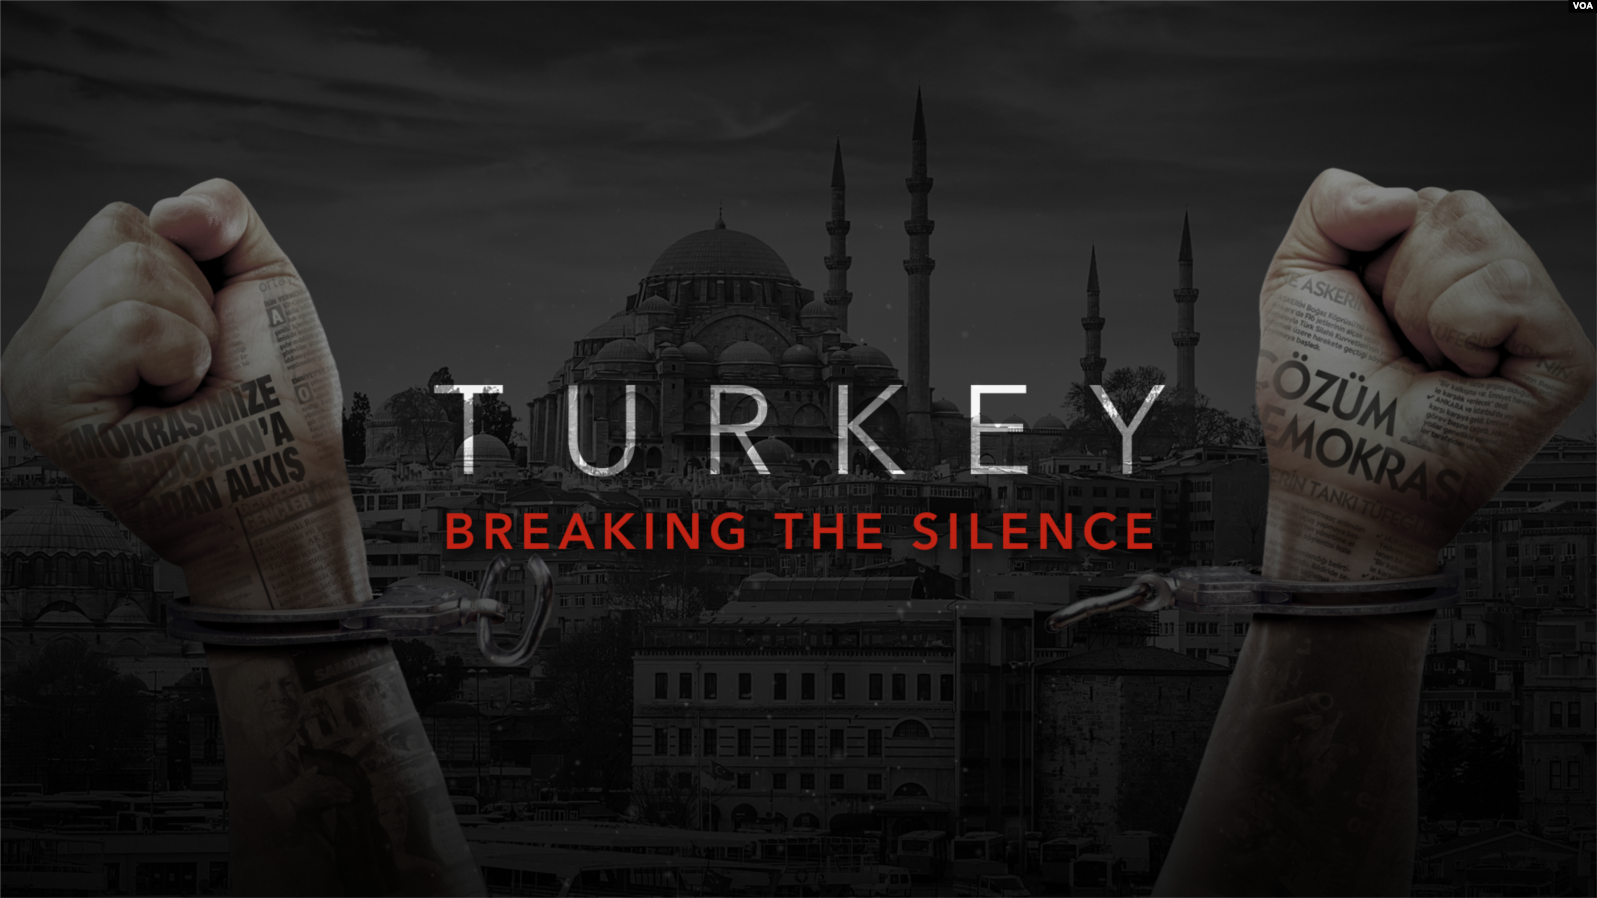 Loss of press freedoms in Turkey subject of new VOA documentary